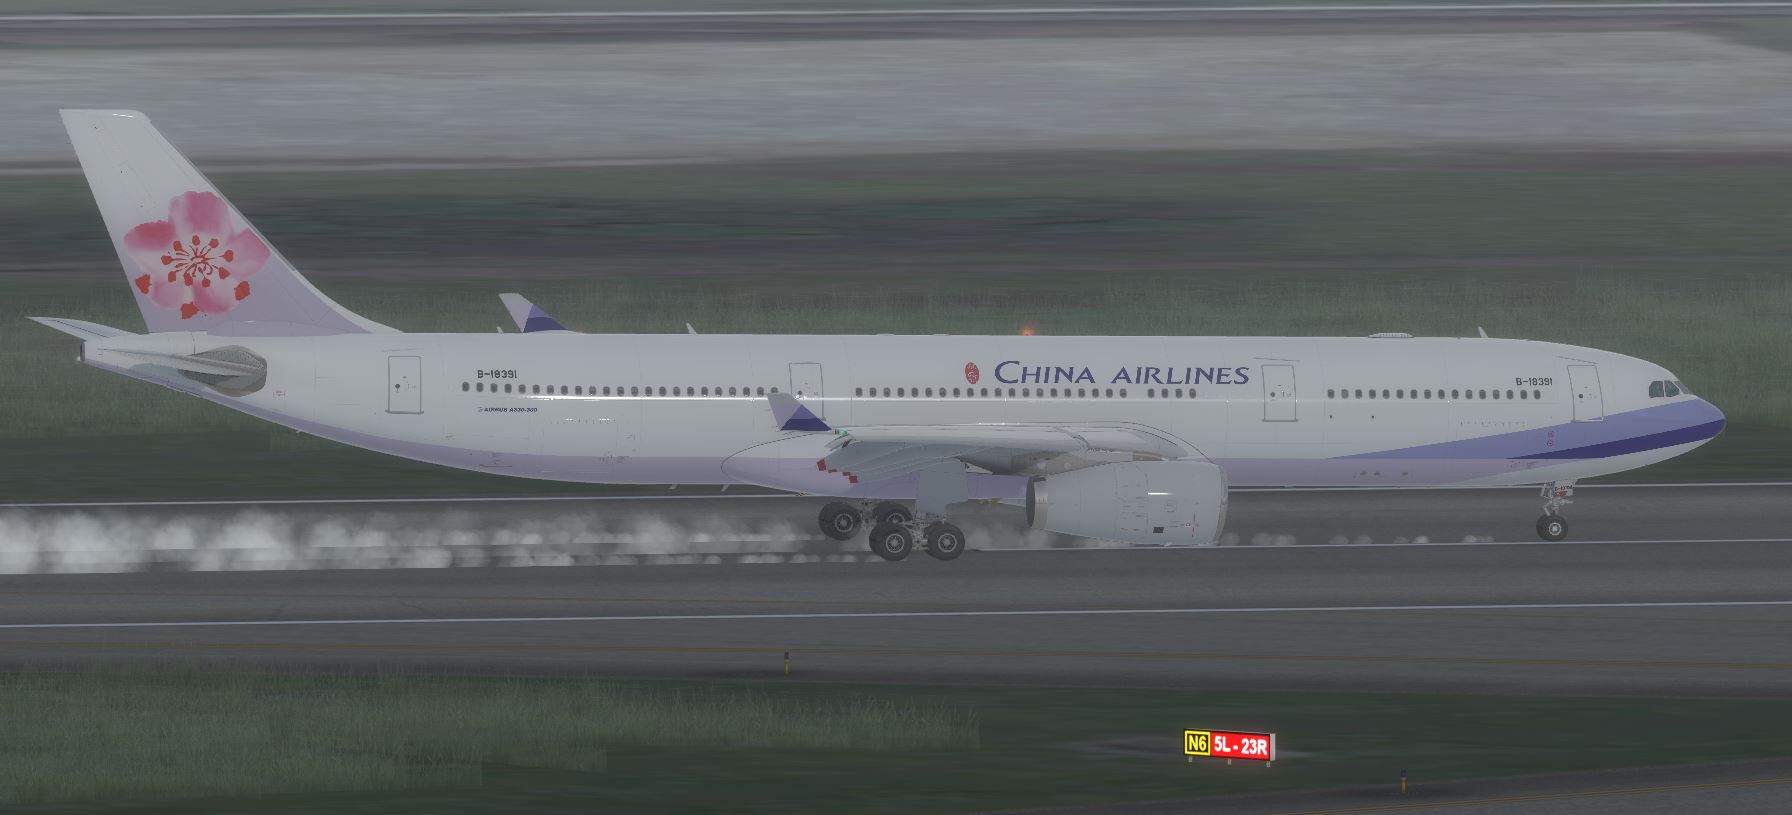 AS A330 ChinaAirline-6317 